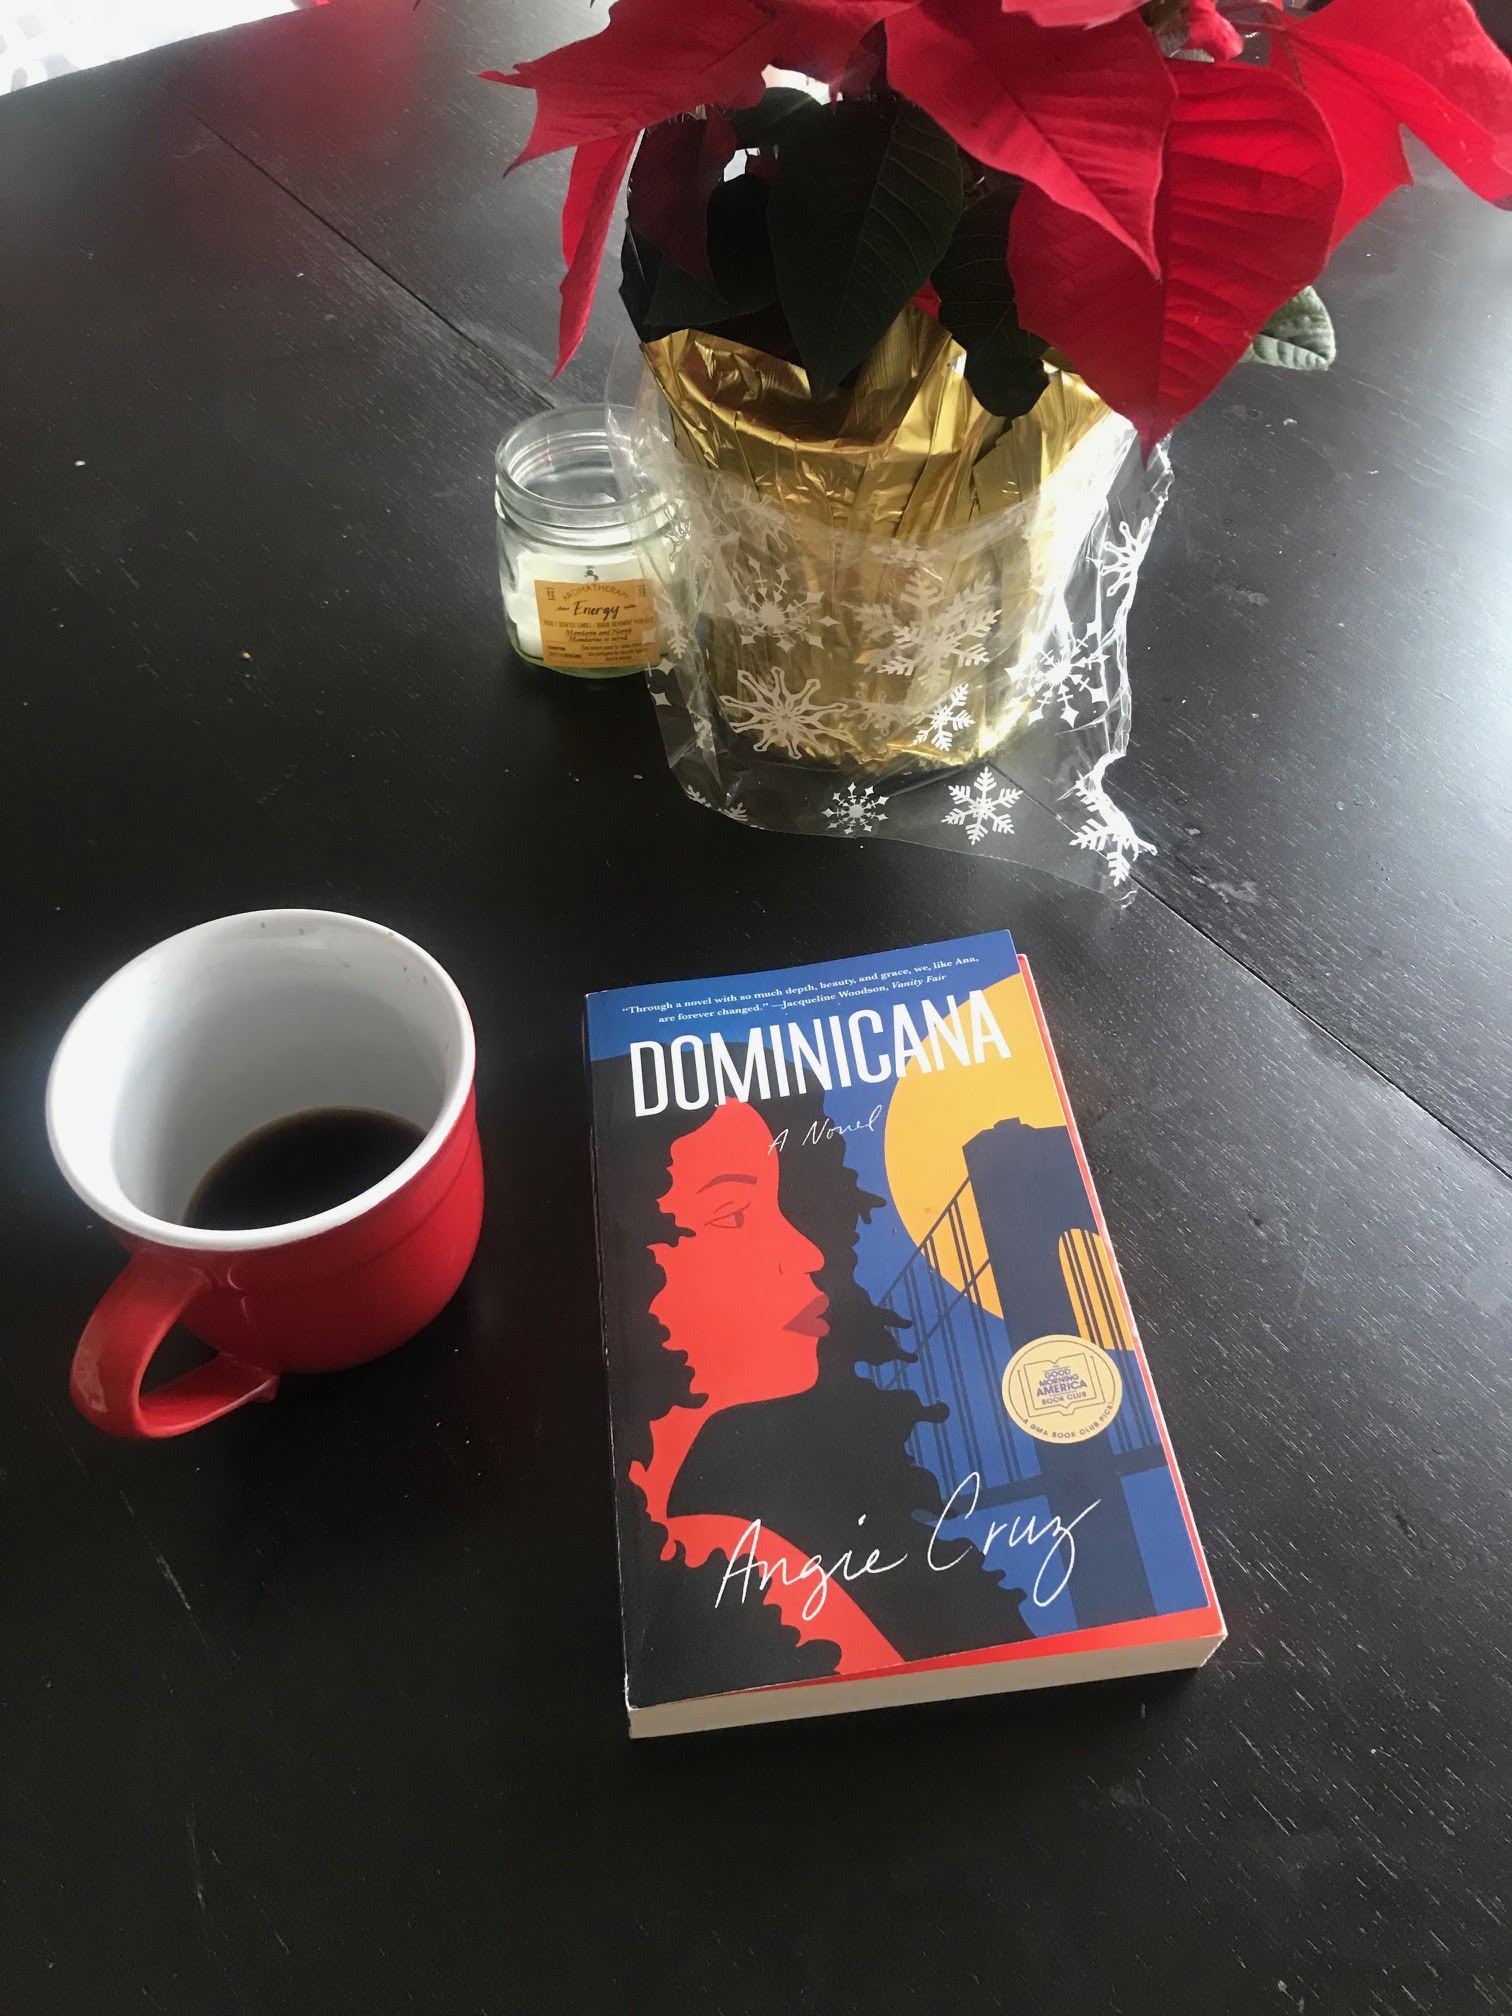 A Review Of Angie Cruzs Dominicana By Damian Dressick 